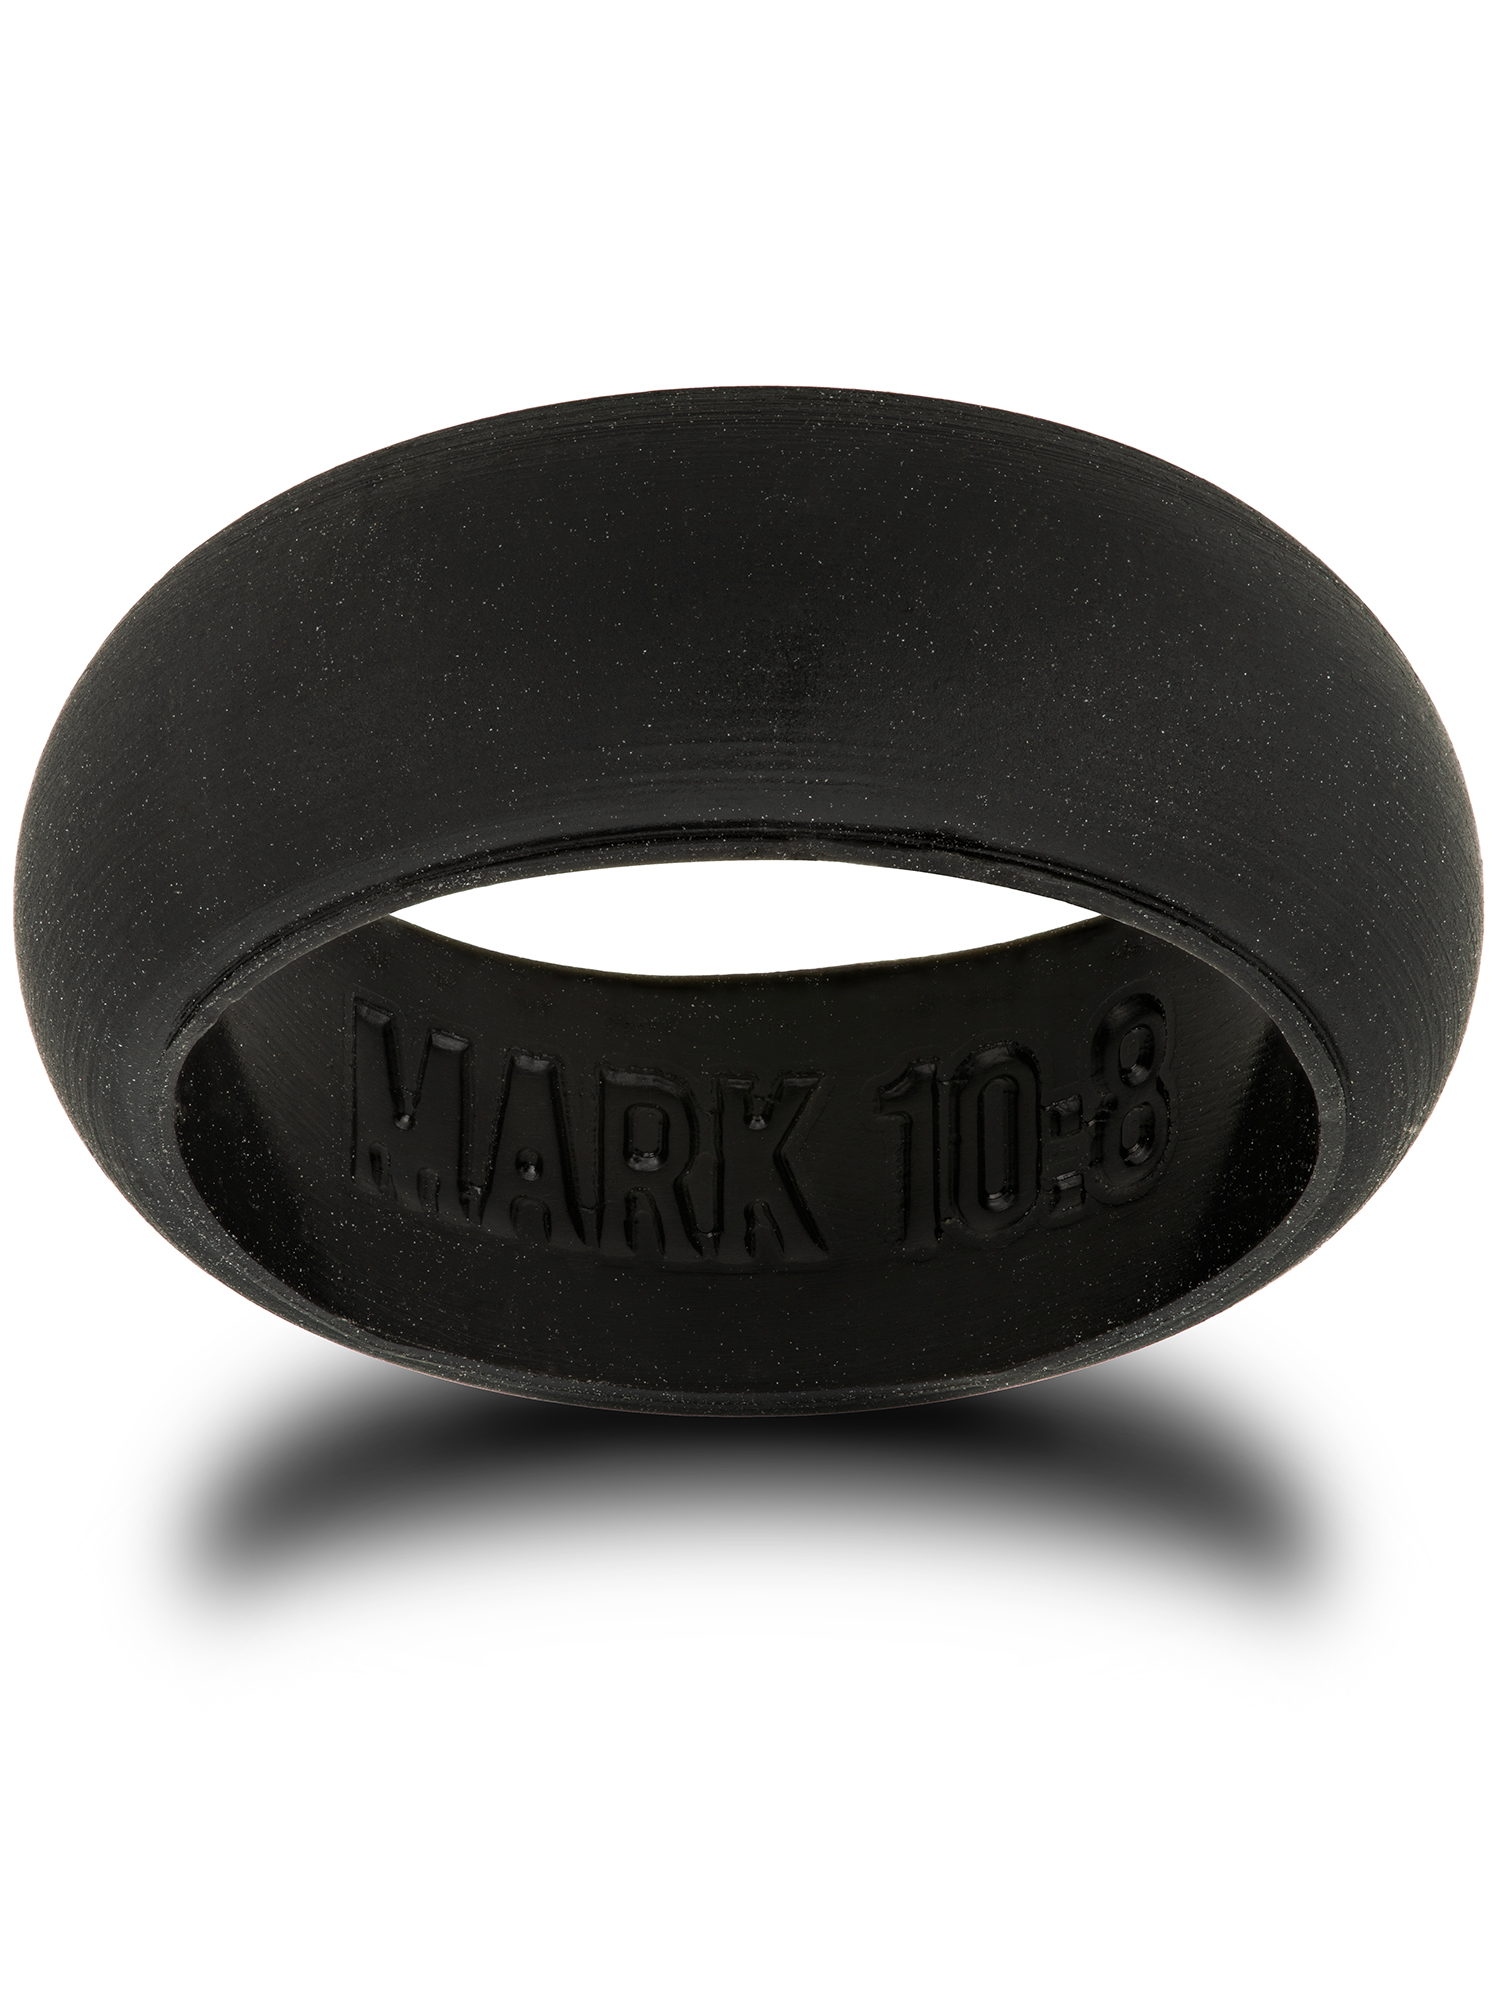 10 popular silicone wedding bands - Reviewed